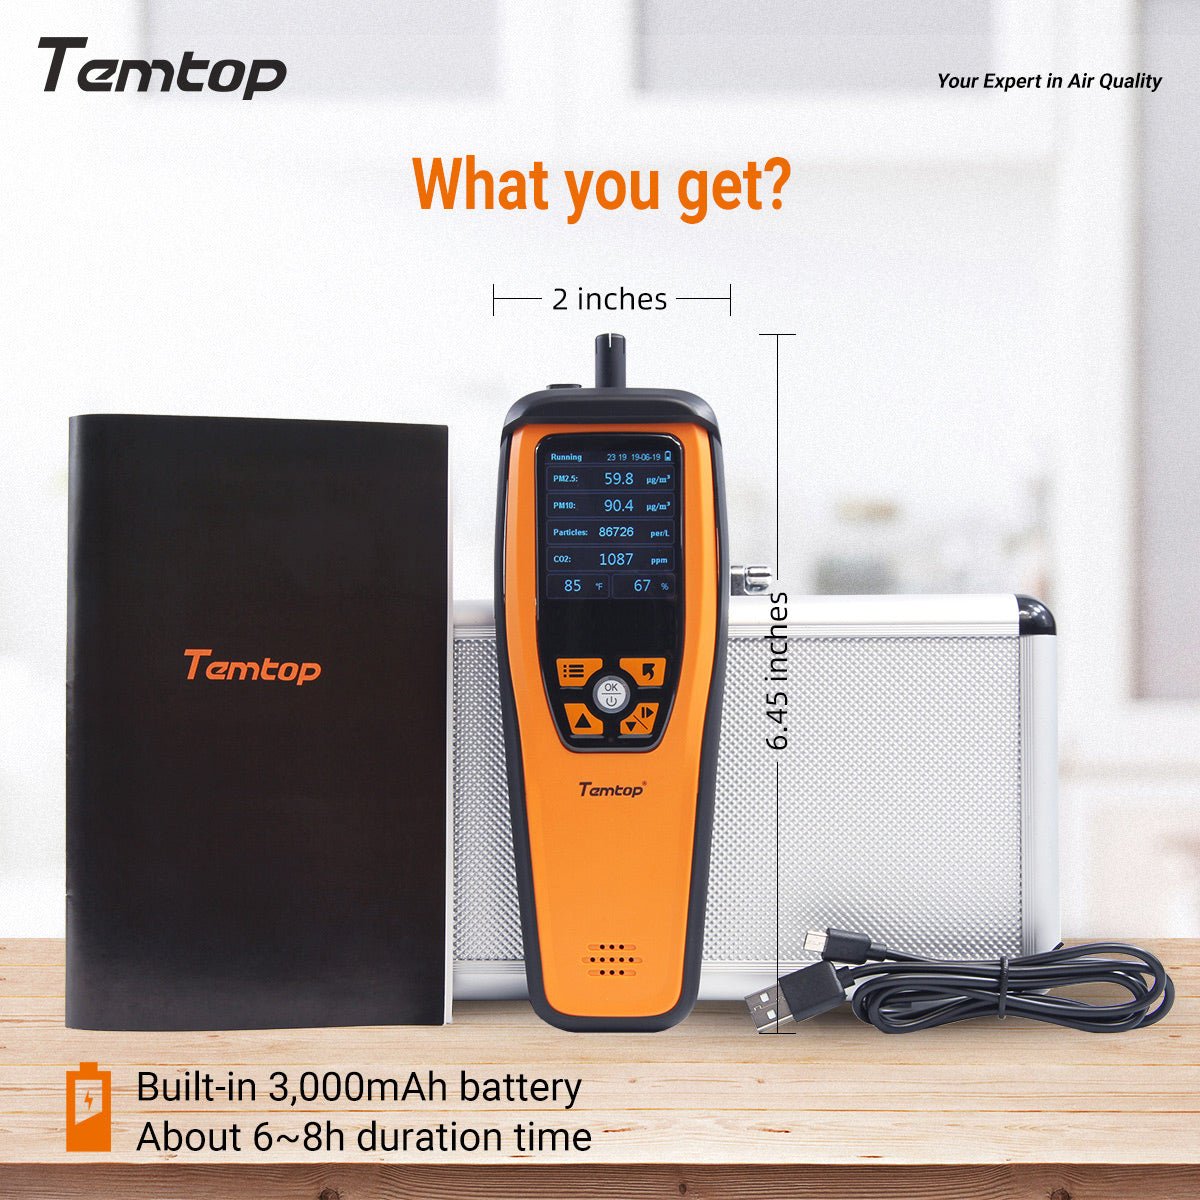 Temtop M2000C CO2 Air Quality Monitor Detects CO2 PM2.5 PM10 and Temperature and humiditiy with easy Calibration - Temtop